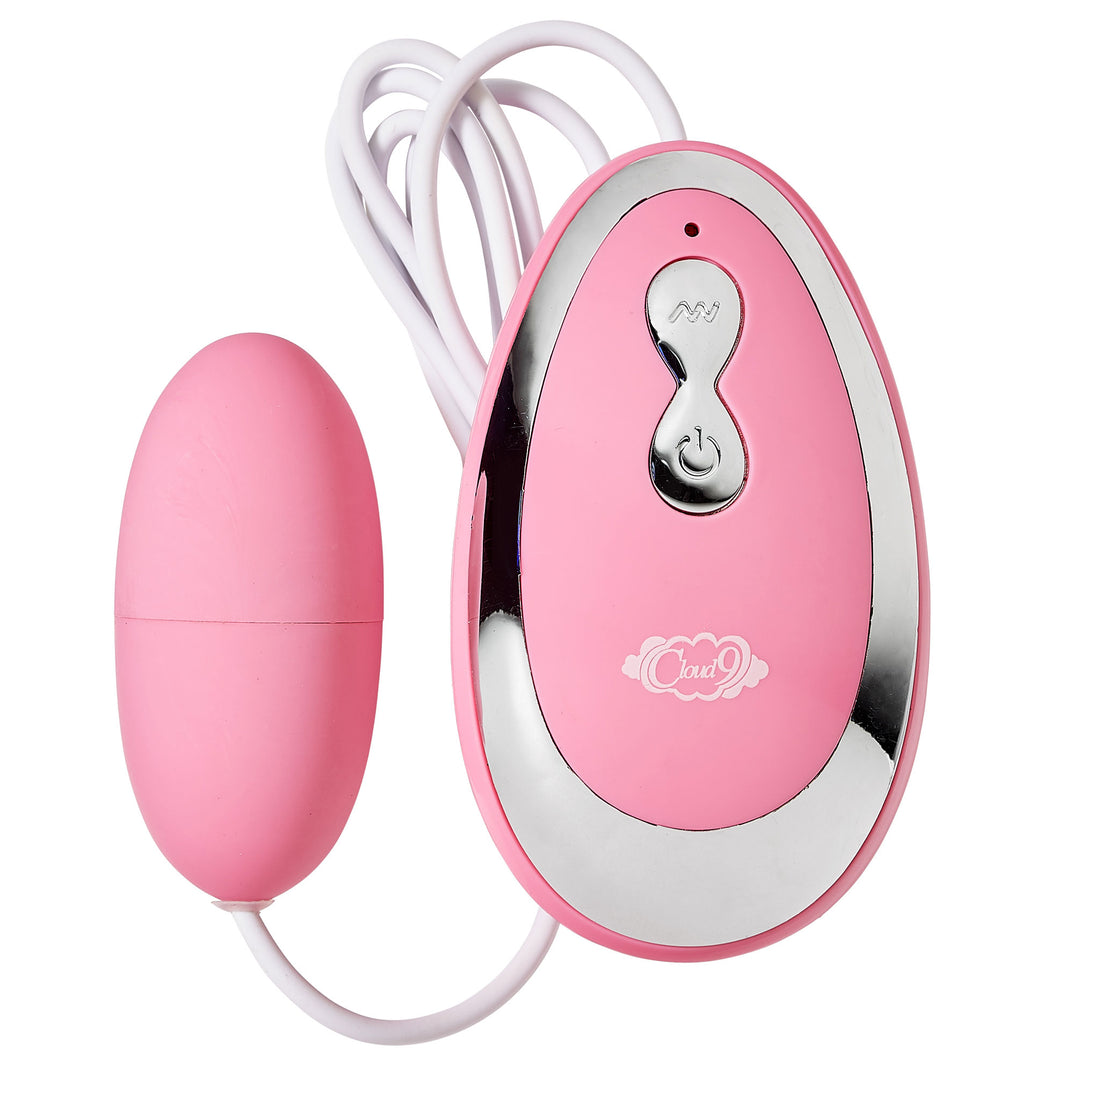 Cloud 9 3 Speed Bullet With Remote - Pink WTC683435